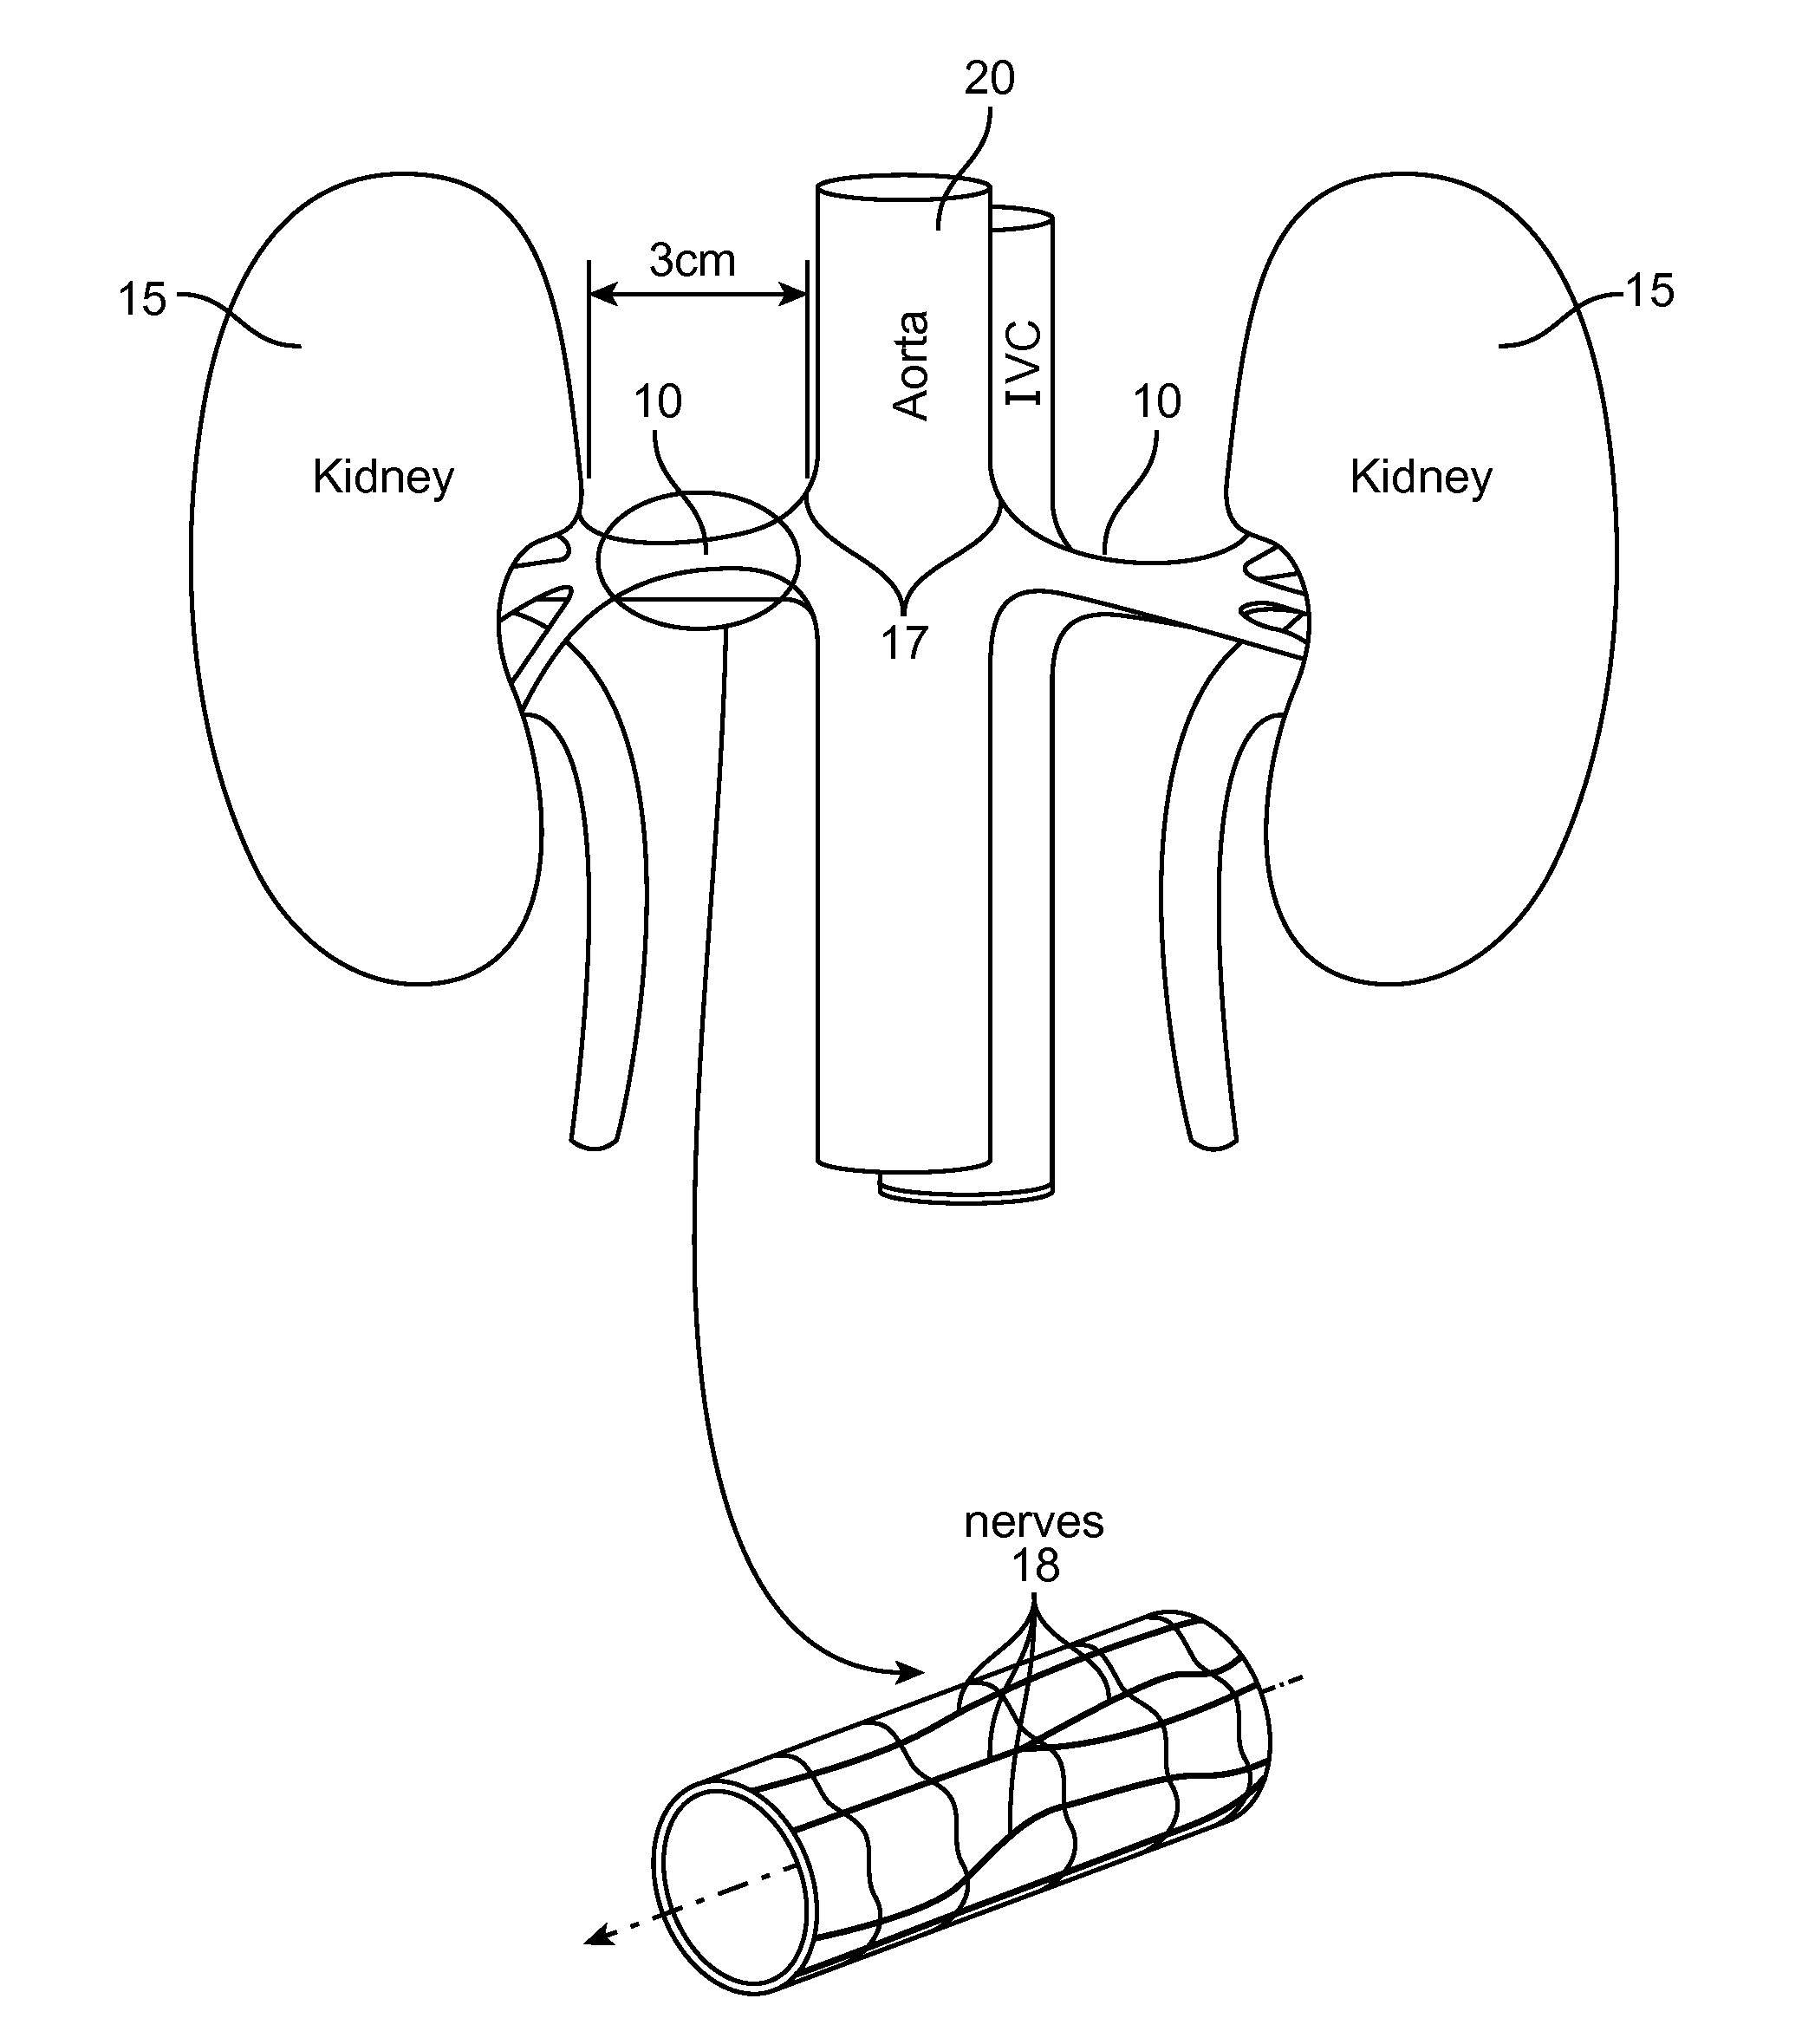 Method and apparatus employing ultrasound energy to remodulate vascular nerves